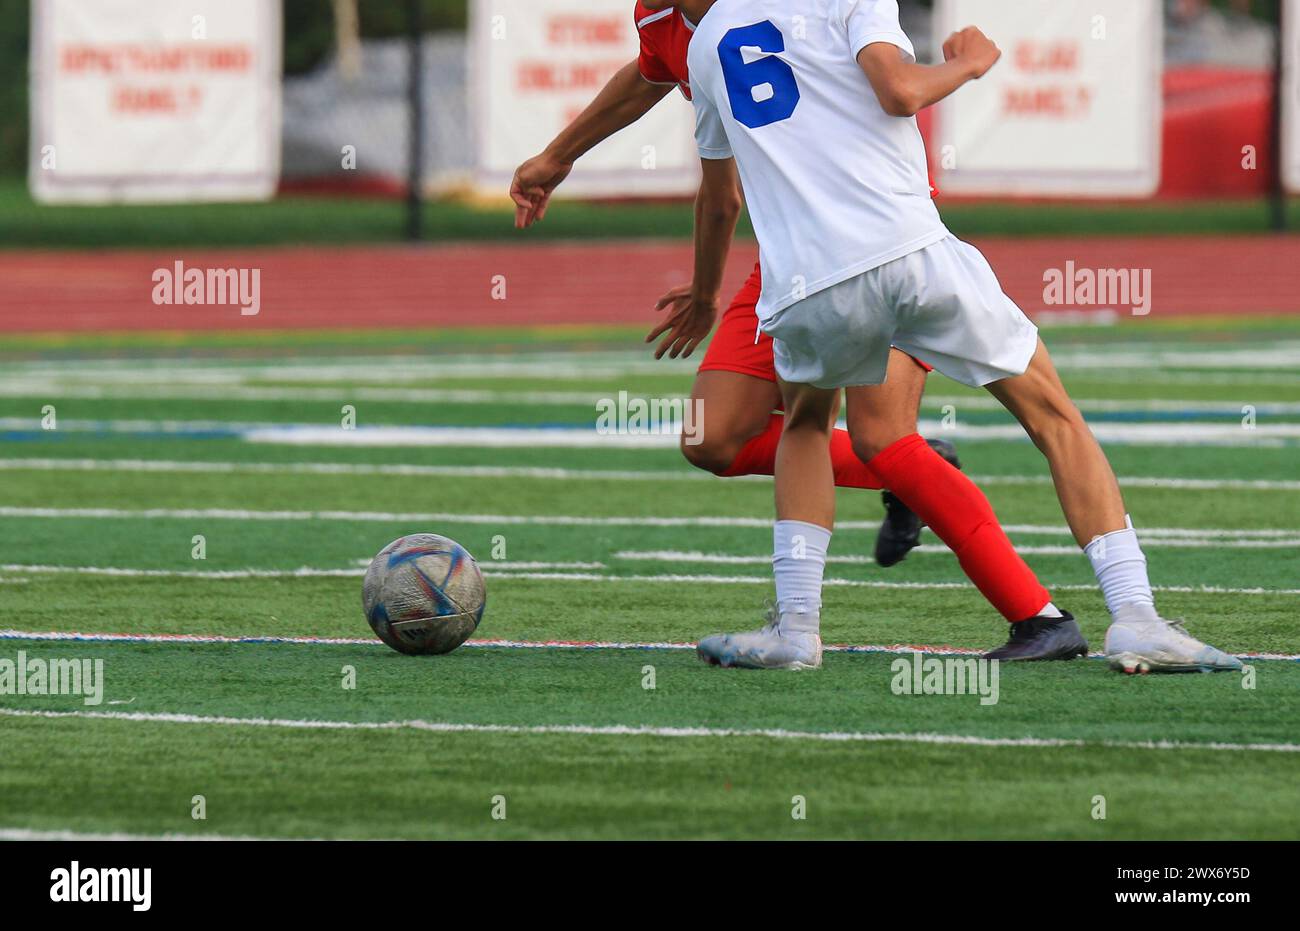 Two high school boys going for the soccer ball during a game. Stock Photo